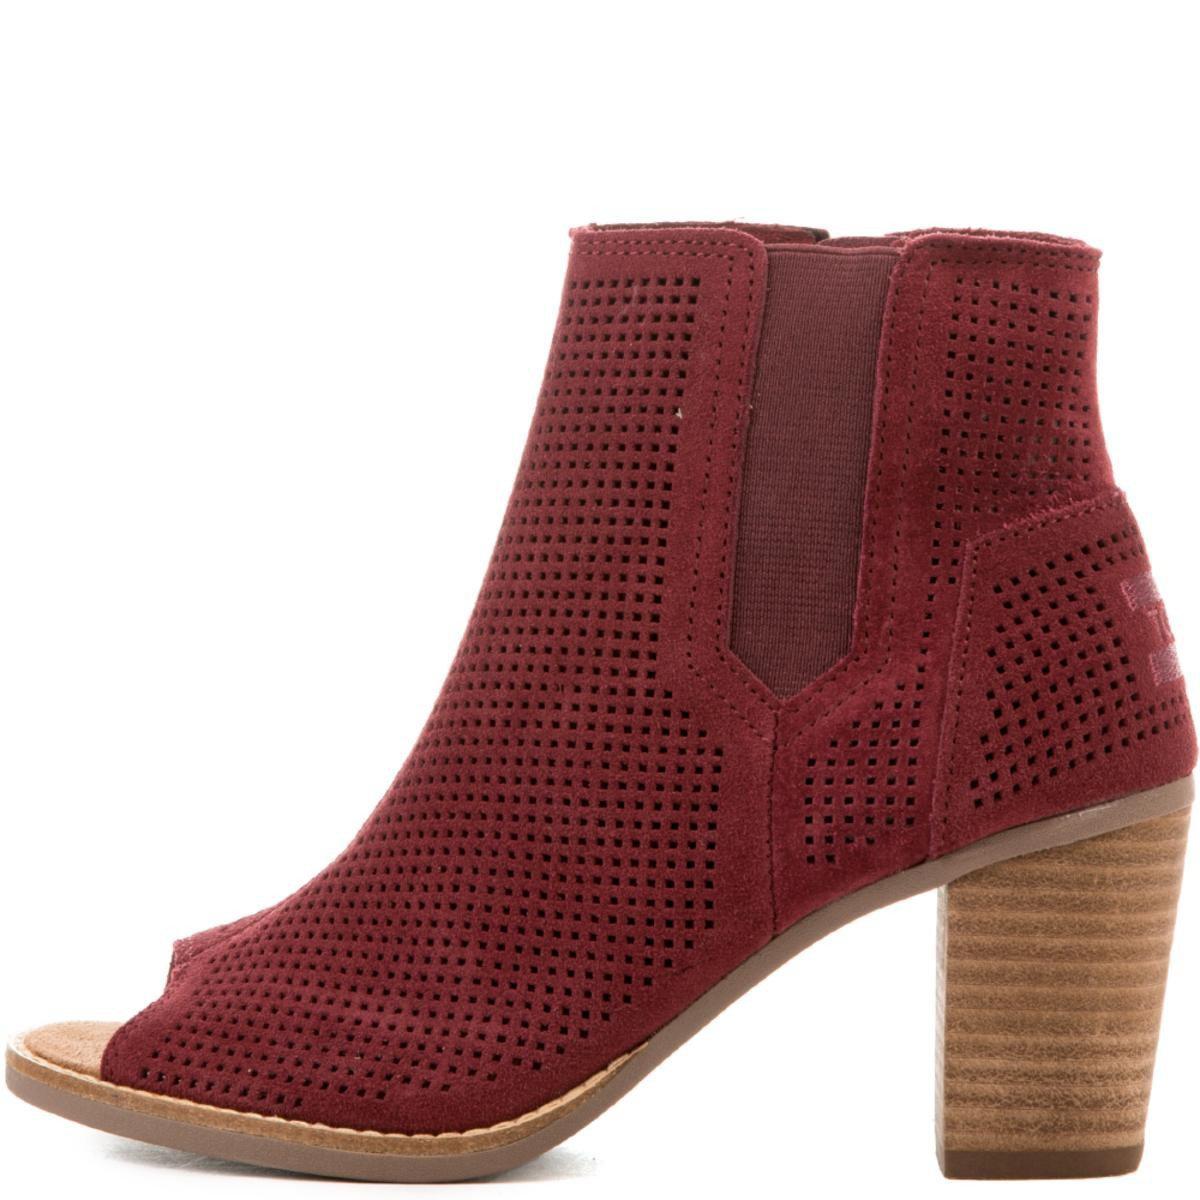 TOMS Majorca Oxblood Perforated Suede 